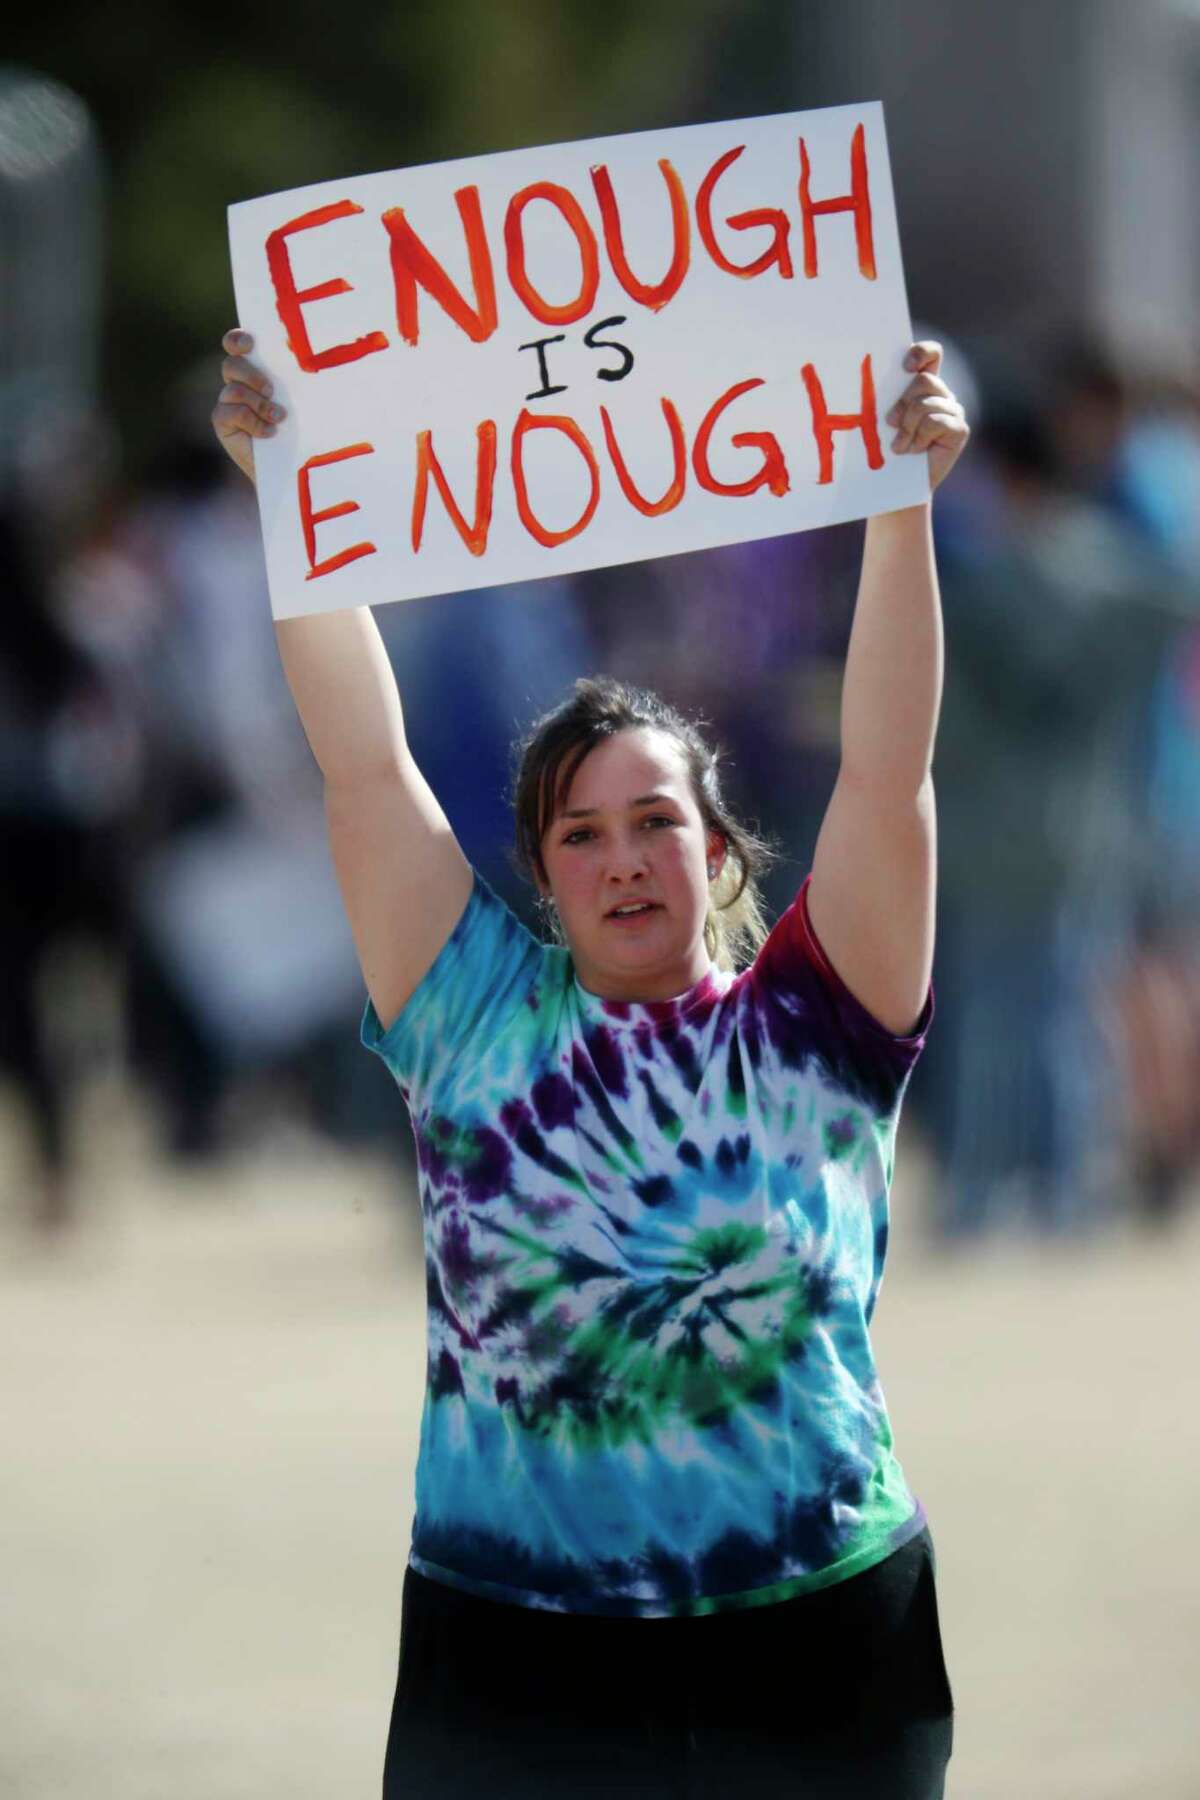 Fifteen-year-old Leah Zundel, a sophomore at Columbine High School, carries a sign during a student walkout to protest gun violence on the soccer field behind the school Wednesday, March 14, 2018, in Littleton, Colo. More than 250 students took part in the short protest at Columbine, the scene of a mass school shooting on April 20, 1999. (AP Photo/David Zalubowski)